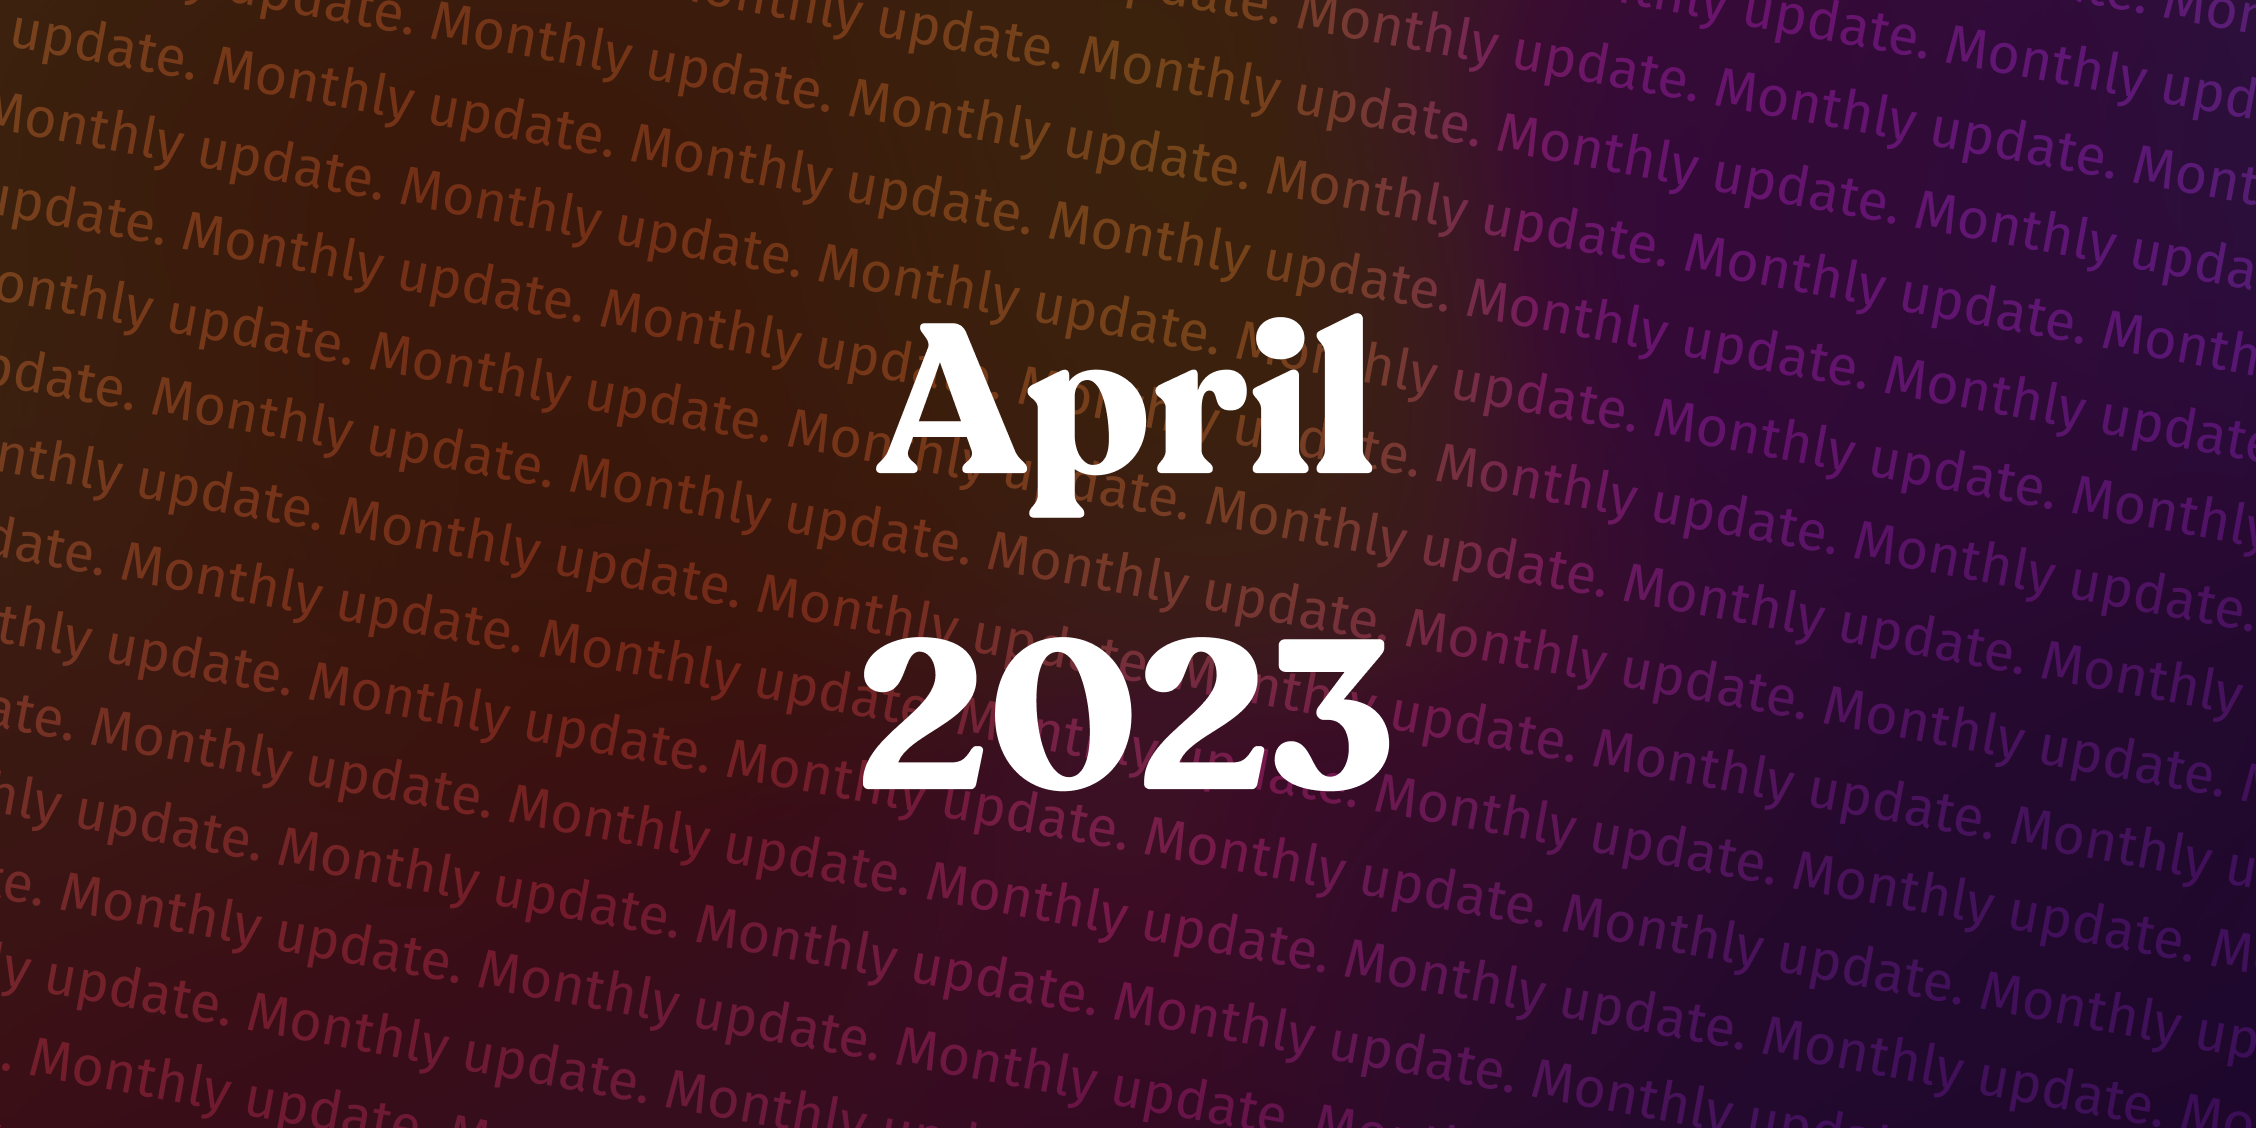 What’s new in Pausly, April 2023